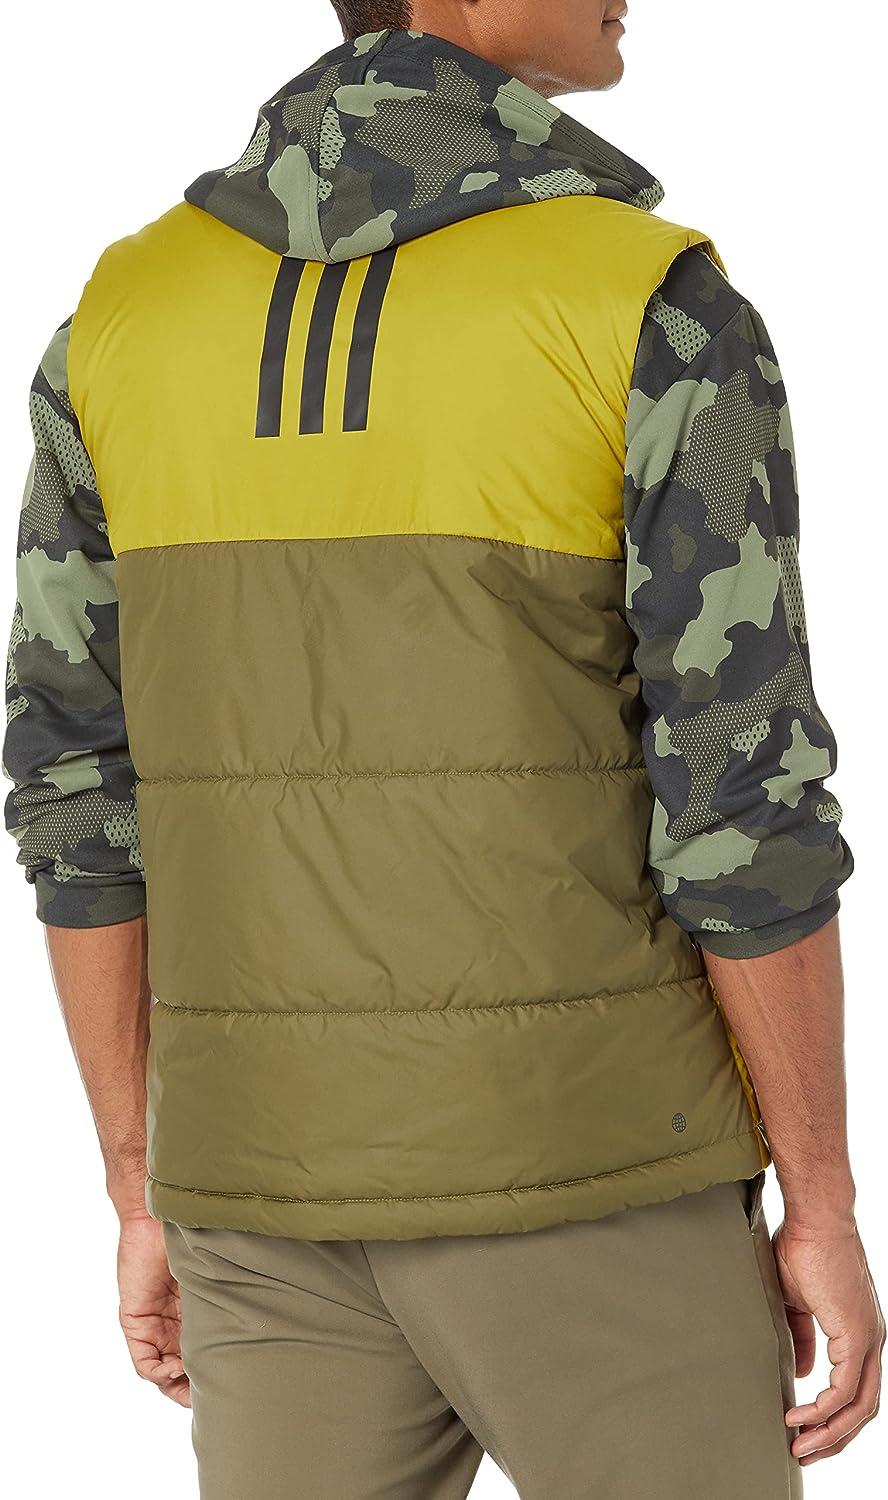 Pulse Olive outdoor Vest 3 Men\'s X-Large Insulated BSC Olive/Focus Stripes adidas